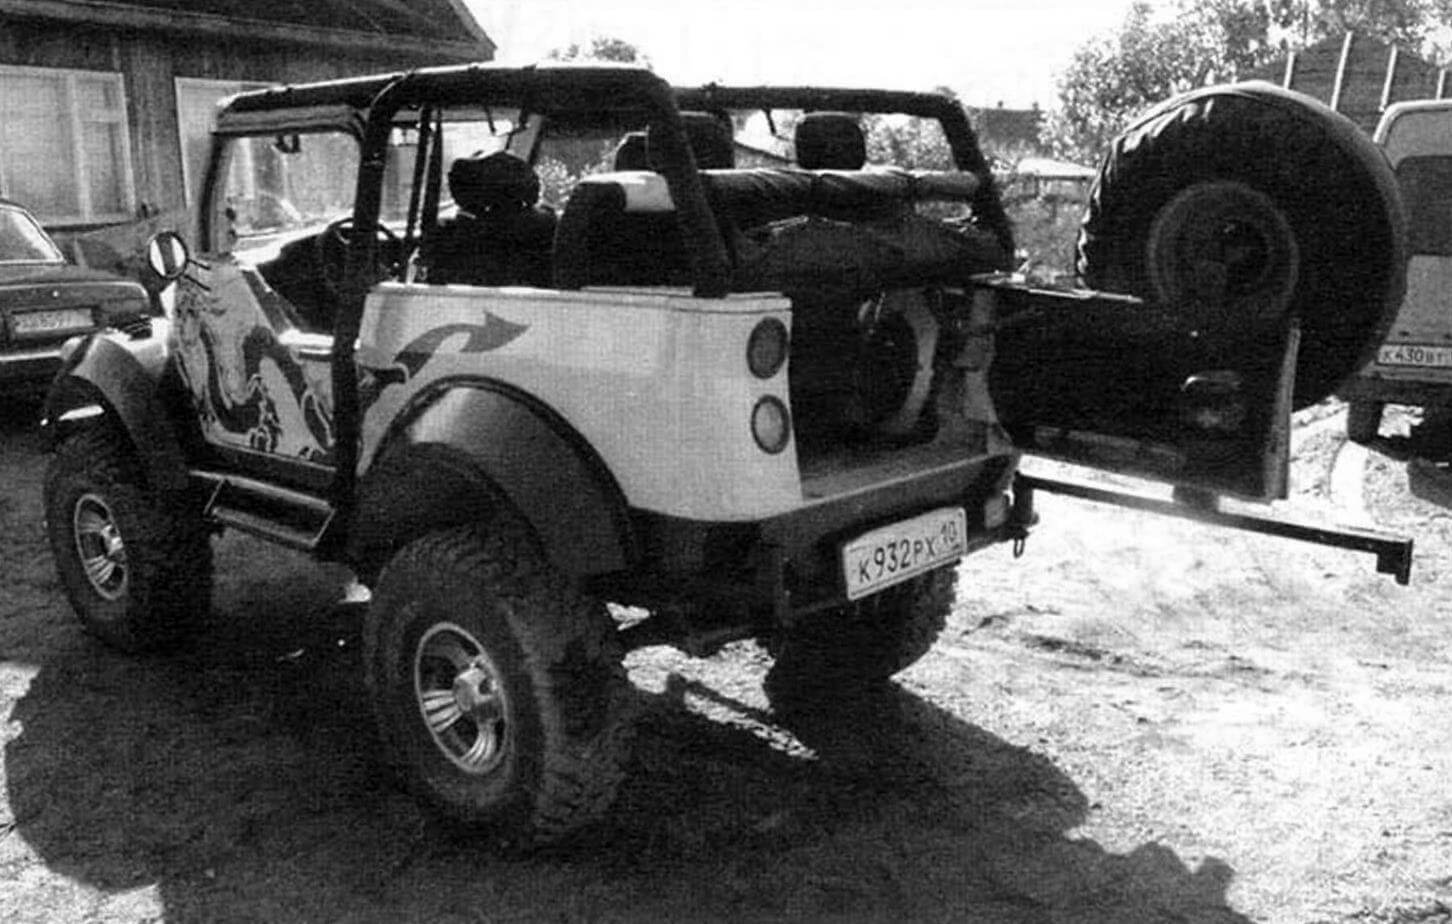 Rear swinging door on a mono-hinge and a spare wheel on a rotating console (“wicket”)